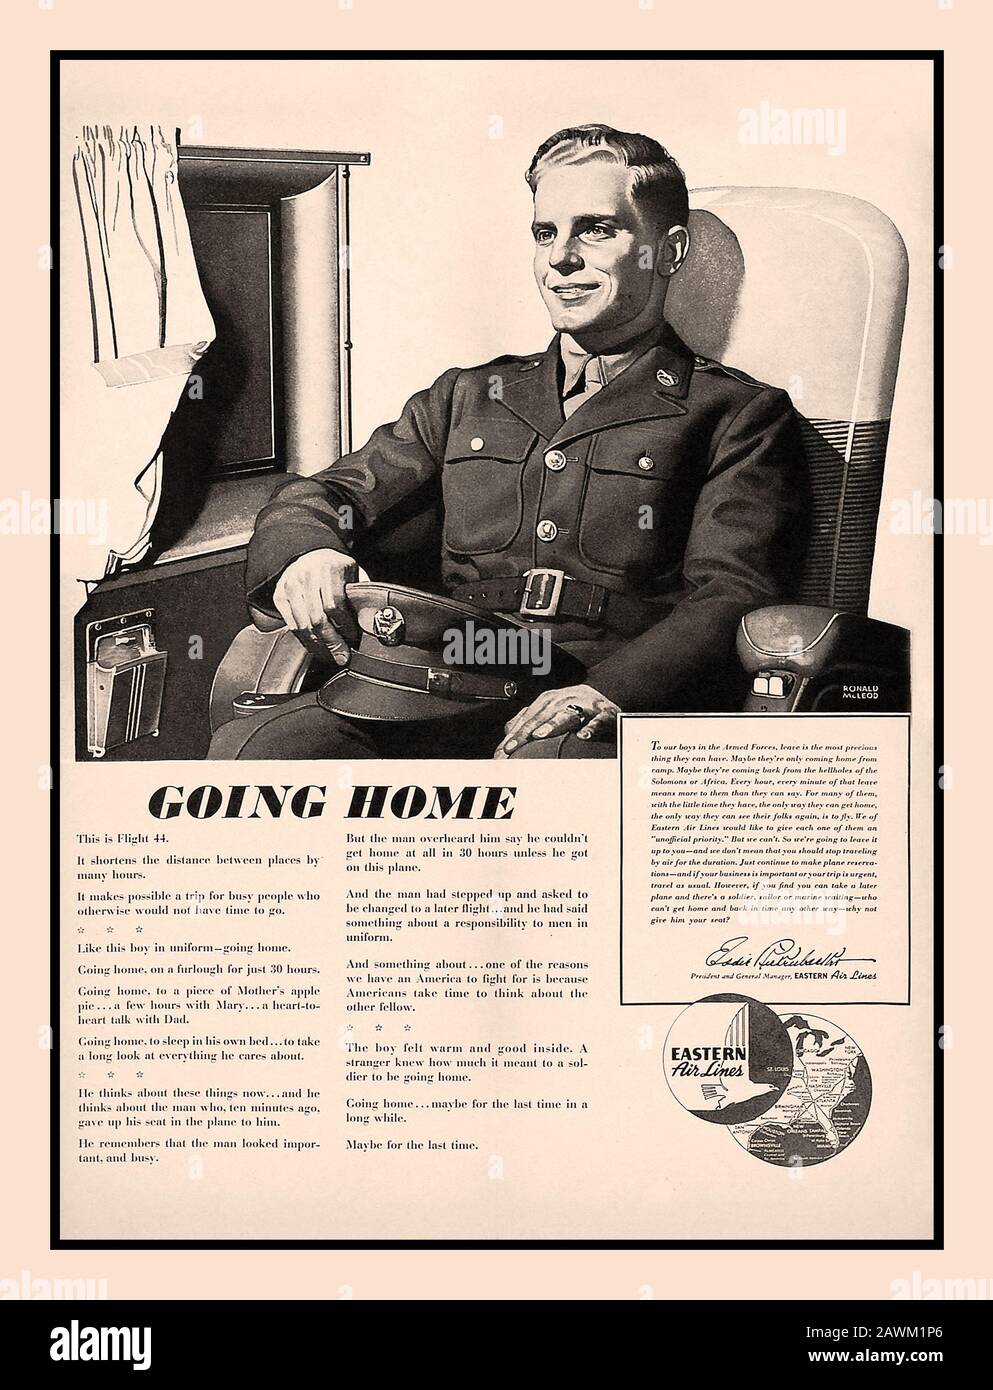 Vintage WW2 Patriotic Press advertisement Eastern Airlines 'Going Home' military advertisement 1943 illustrating a member of the military going home on war leave, via Eastern Airlines. USA World War II Second World War Stock Photo